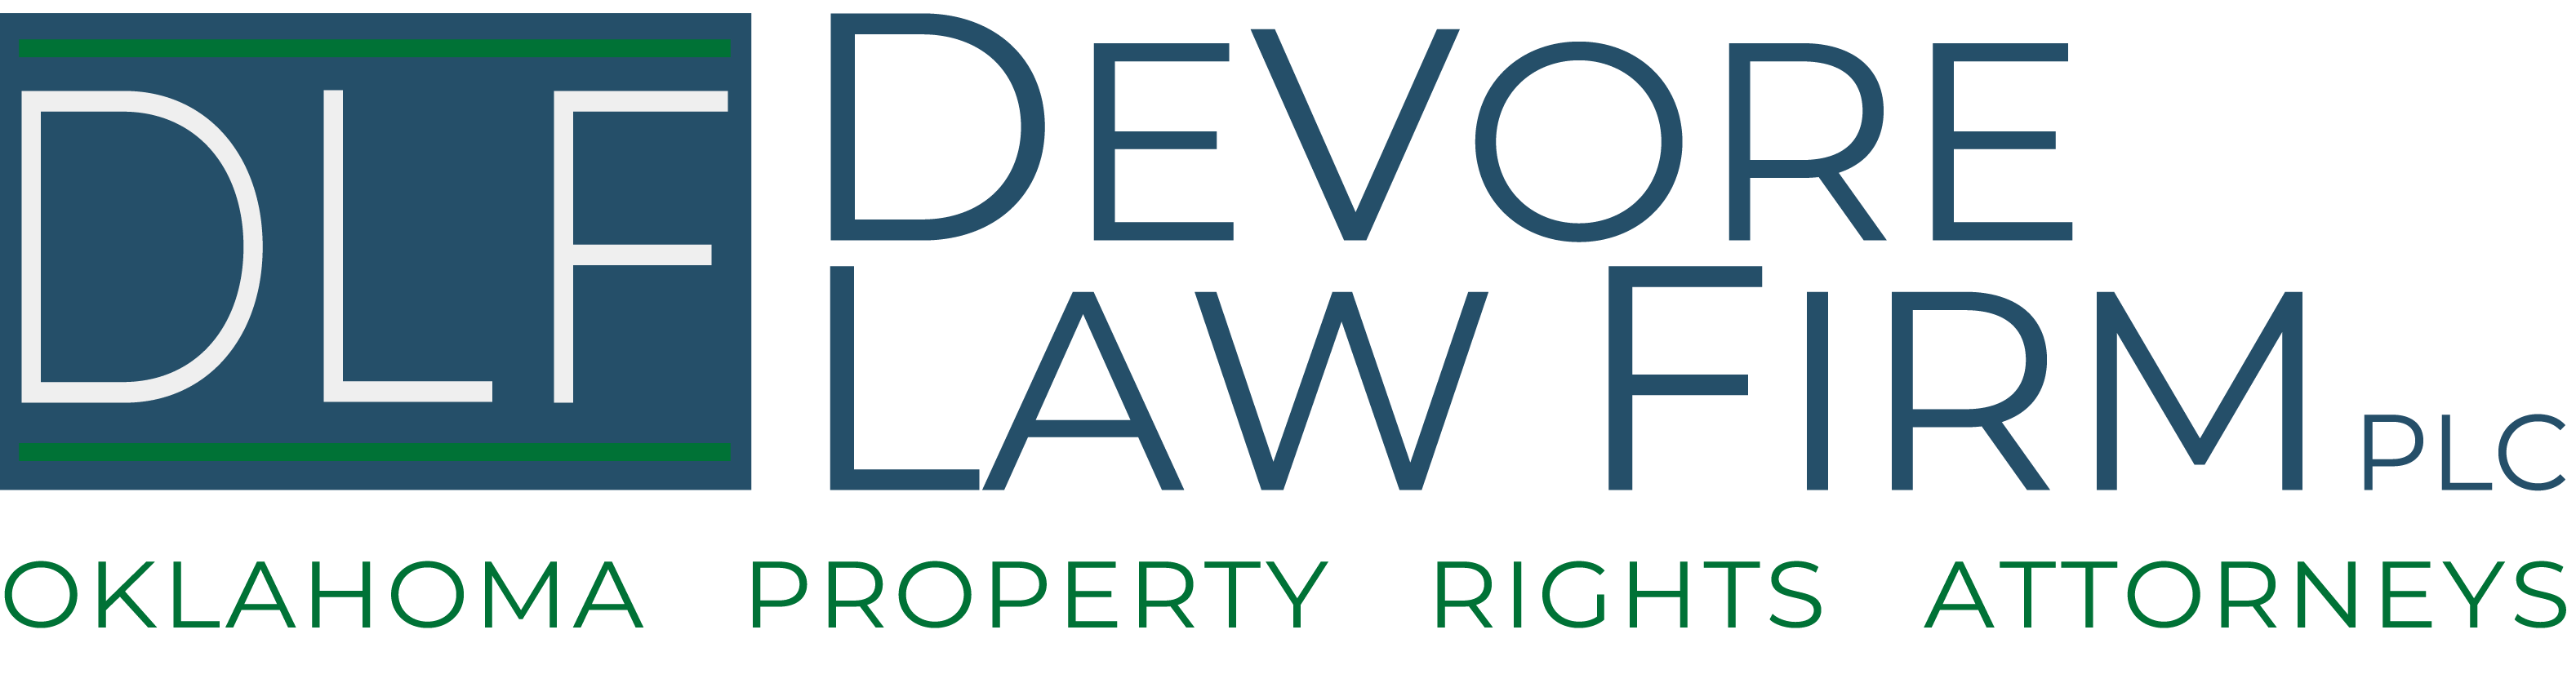 DeVore Law Firm